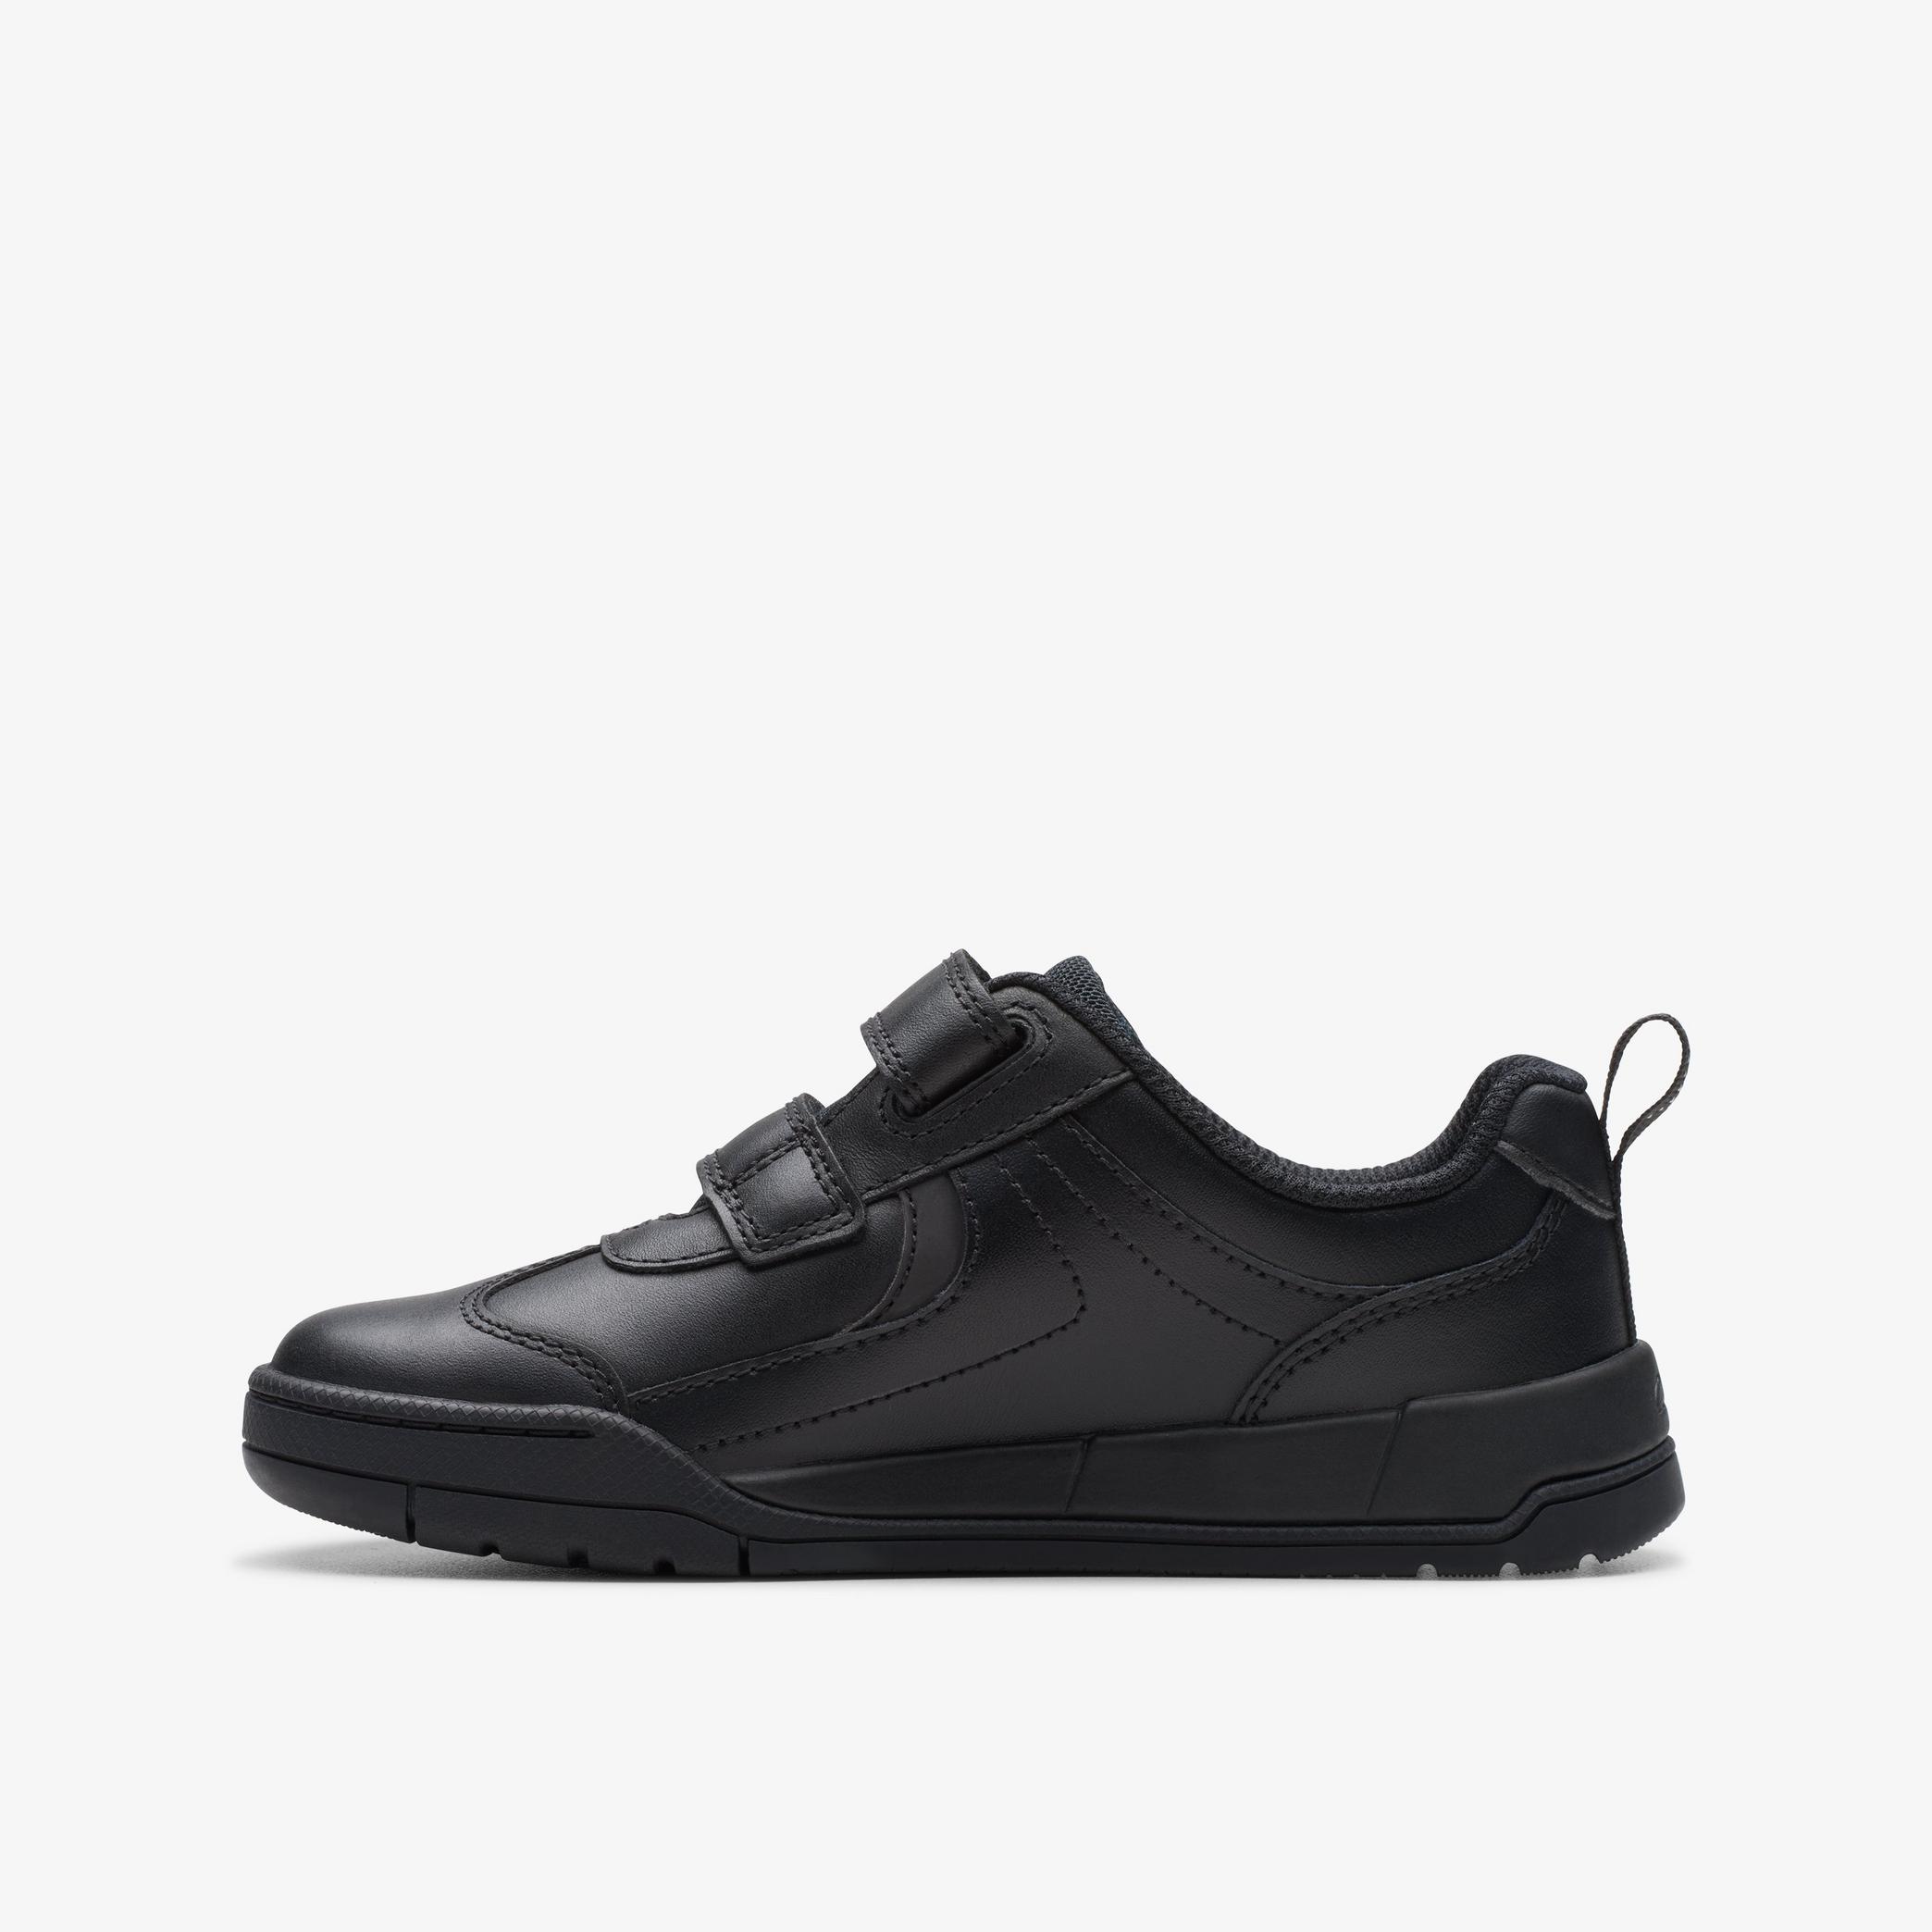 Kick Pace Kid Black Leather Shoes, view 2 of 6